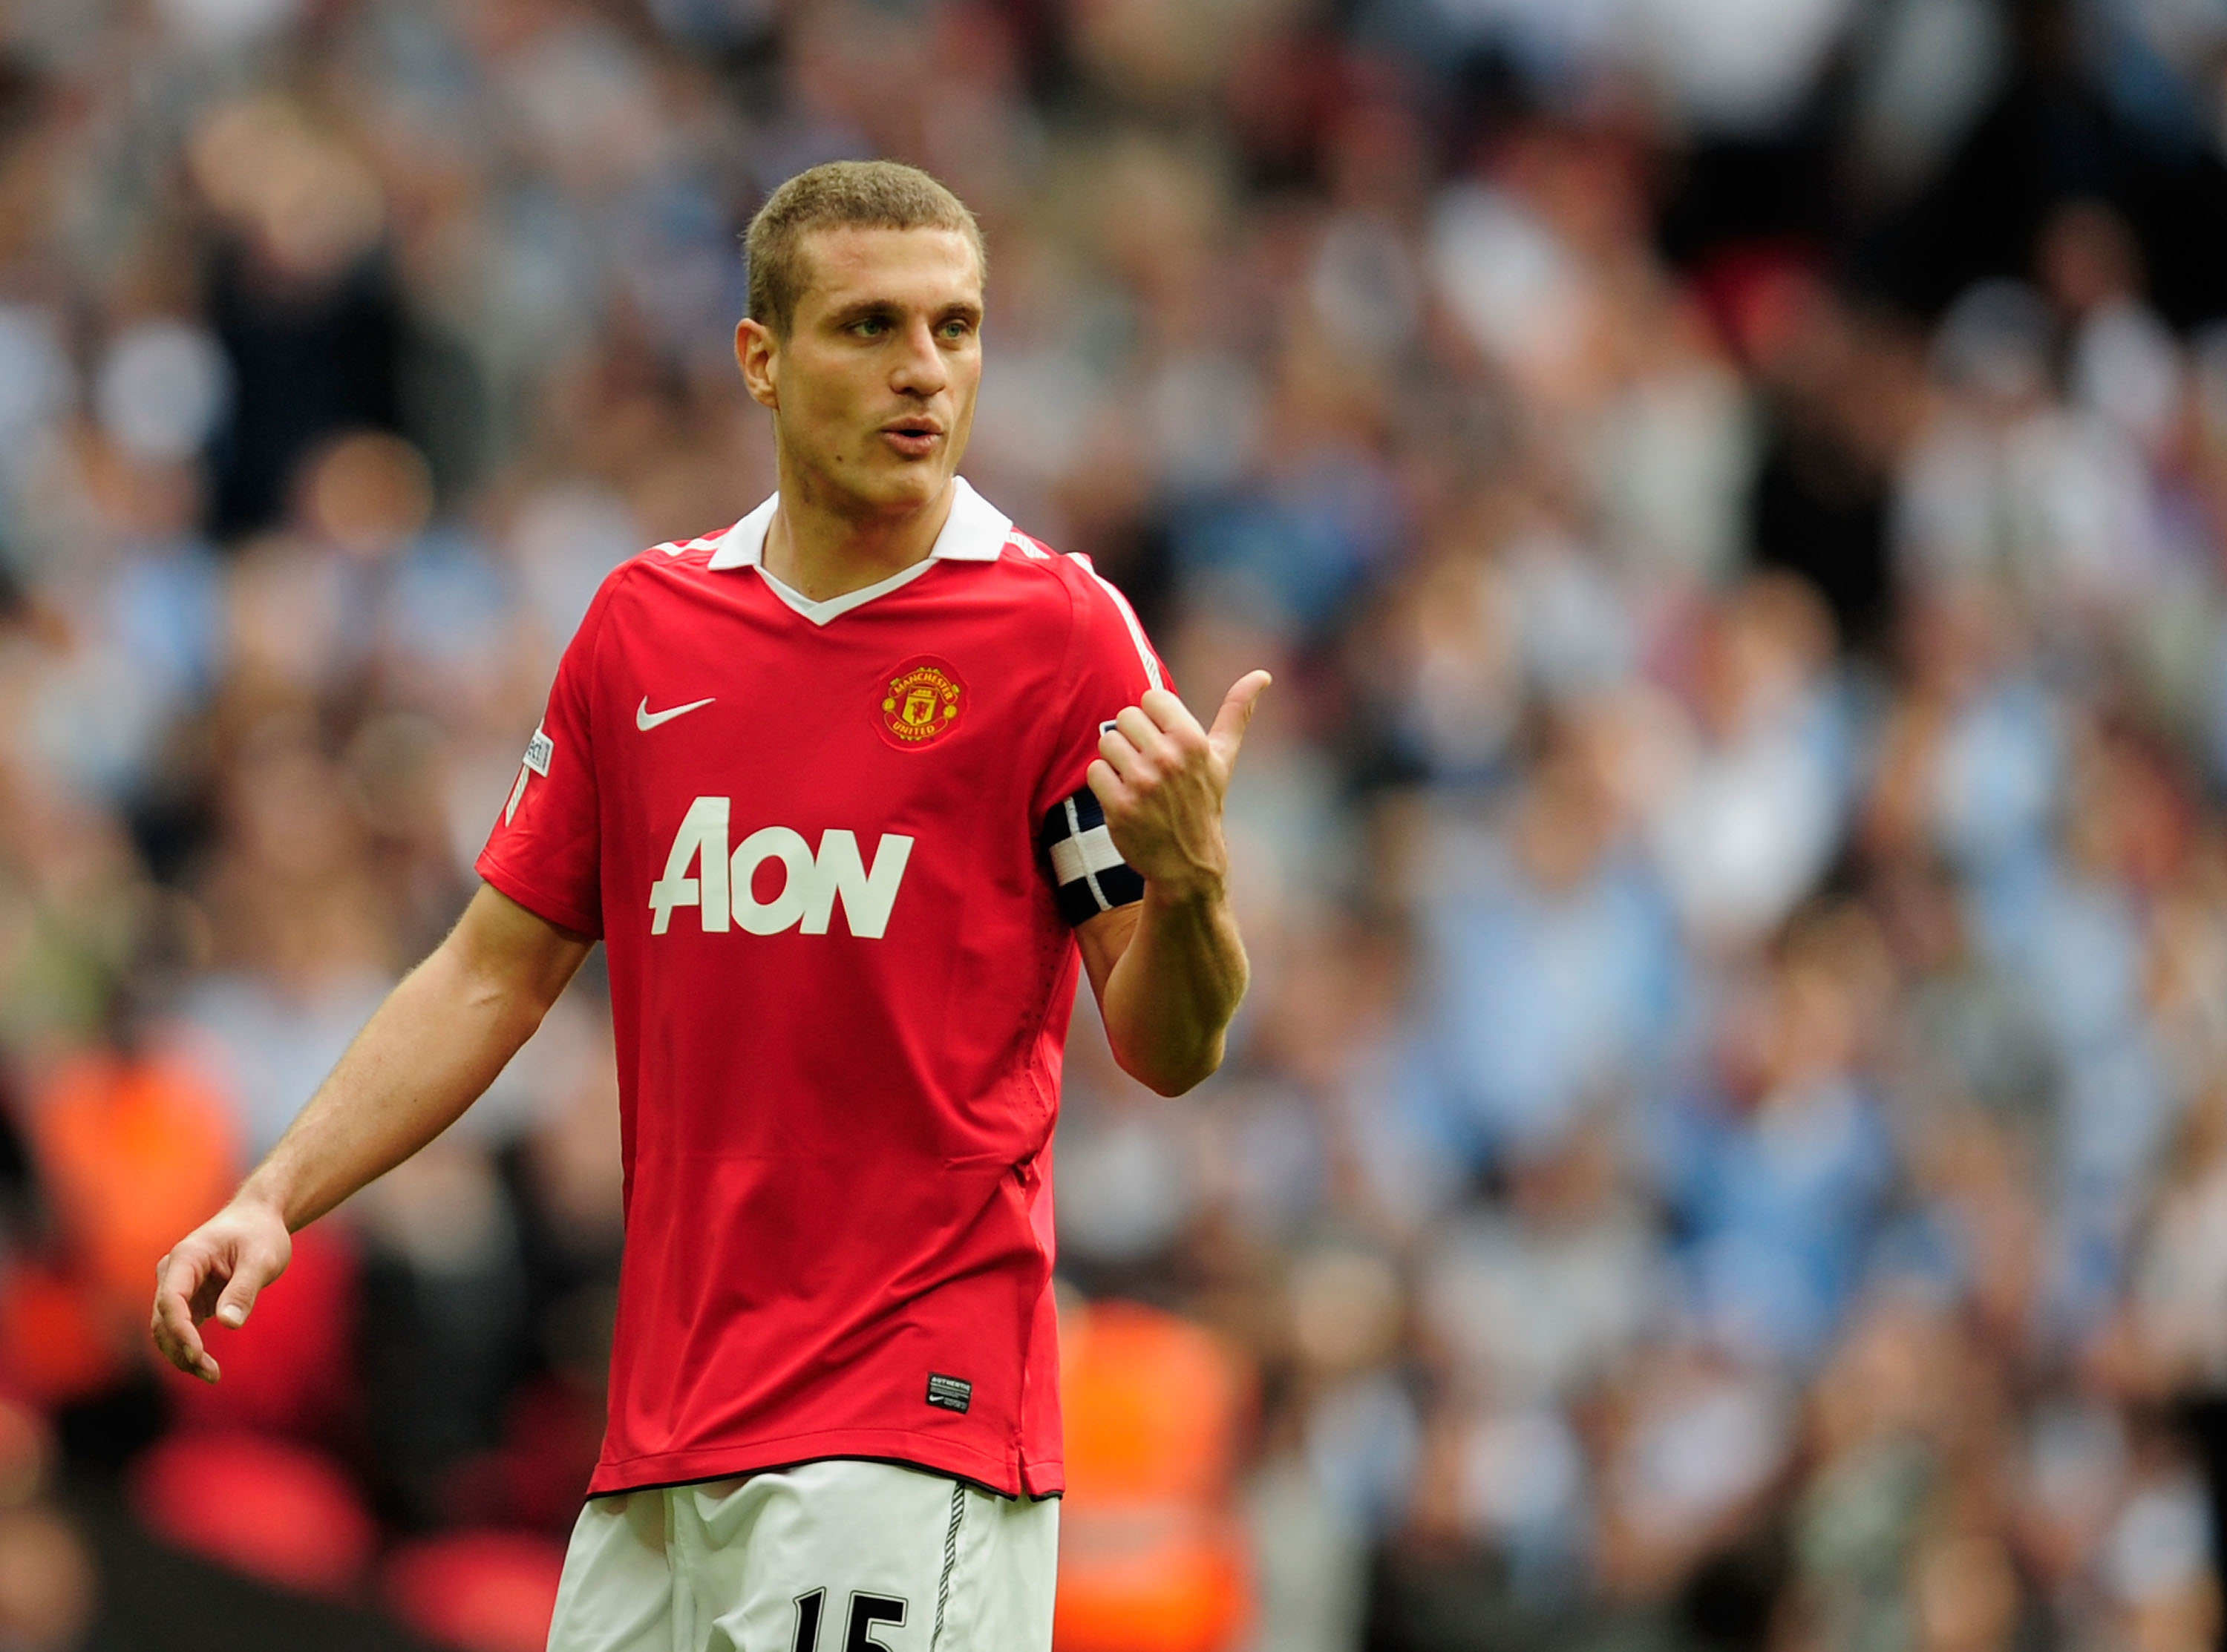 LONDON, ENGLAND - APRIL 16: Nemanja Vidic of Manchester United gestures during the FA Cup sponsored by E.ON semi final match between Manchester City and Manchester United at Wembley Stadium on April 16, 2011 in London, England.  (Photo by Jamie McDonald/G